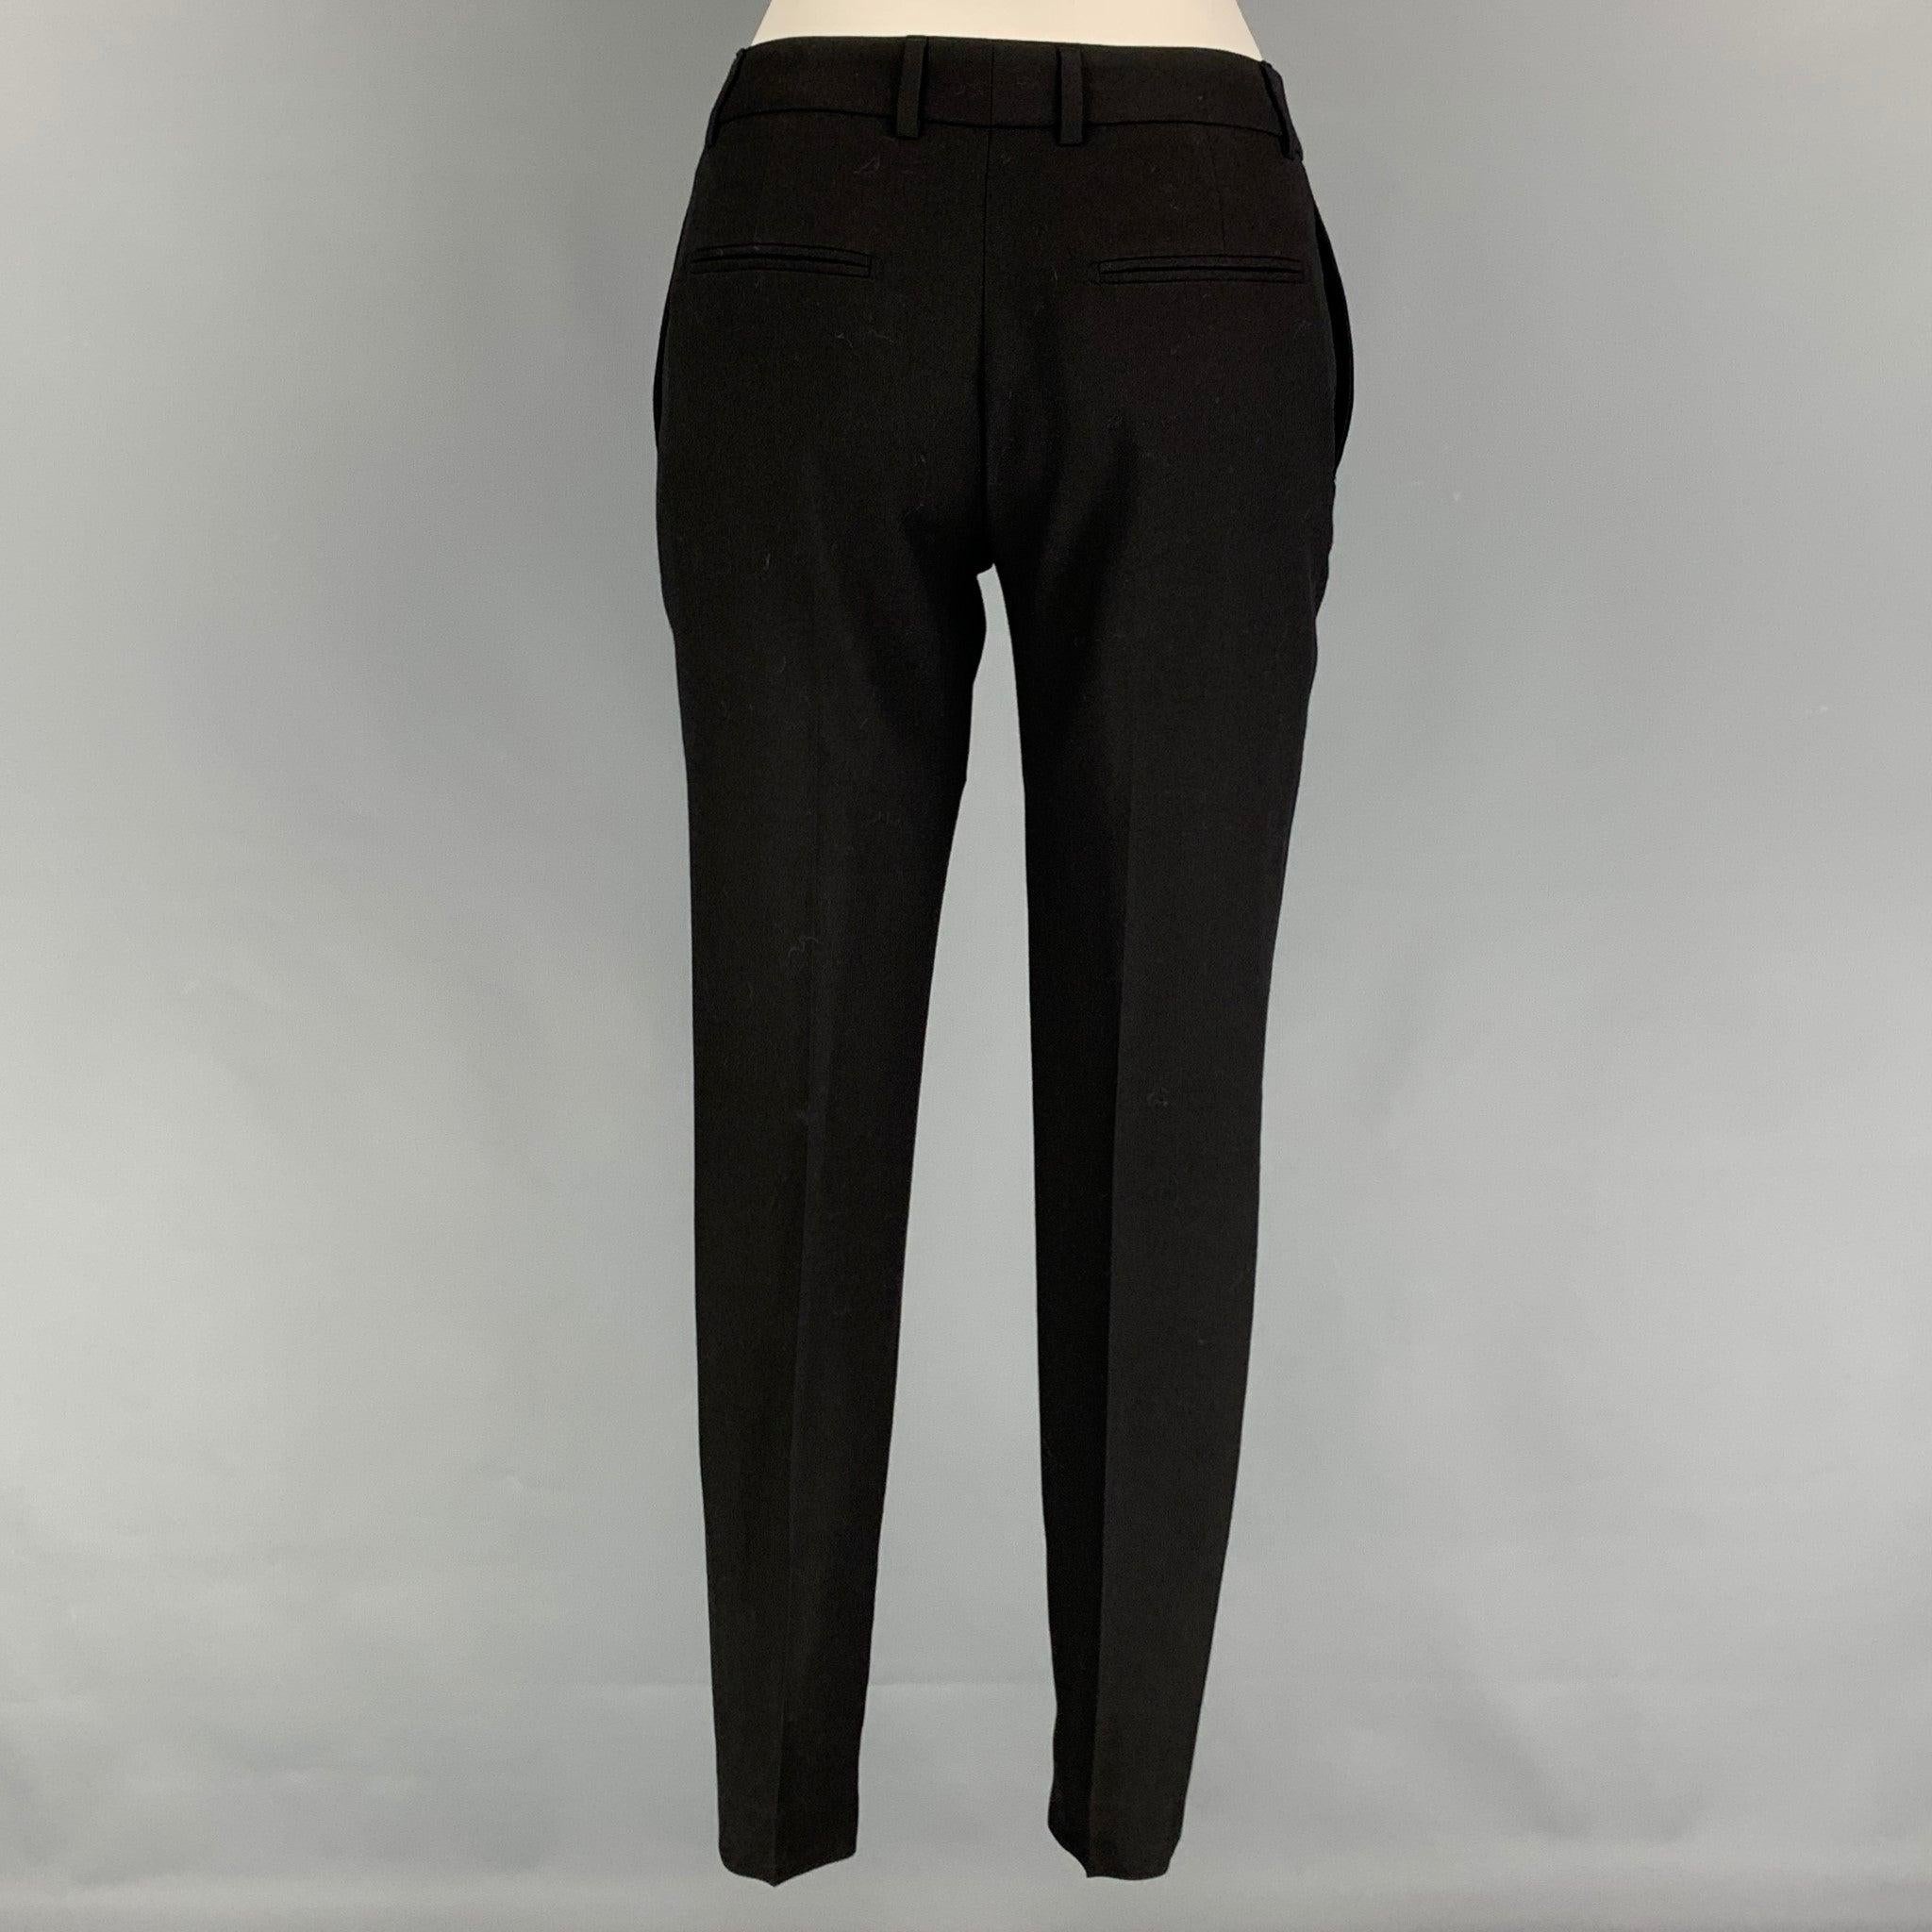 SAINT LAURENT dress pants comes in a black virgin wool featuring a skinny fit, flat front, zipped legs, front tab, and a zip fly closure. Made in Italy.
Very Good
Pre-Owned Condition. 

Marked:   F 34 

Measurements: 
  Waist: 28 inches  Rise: 8.5